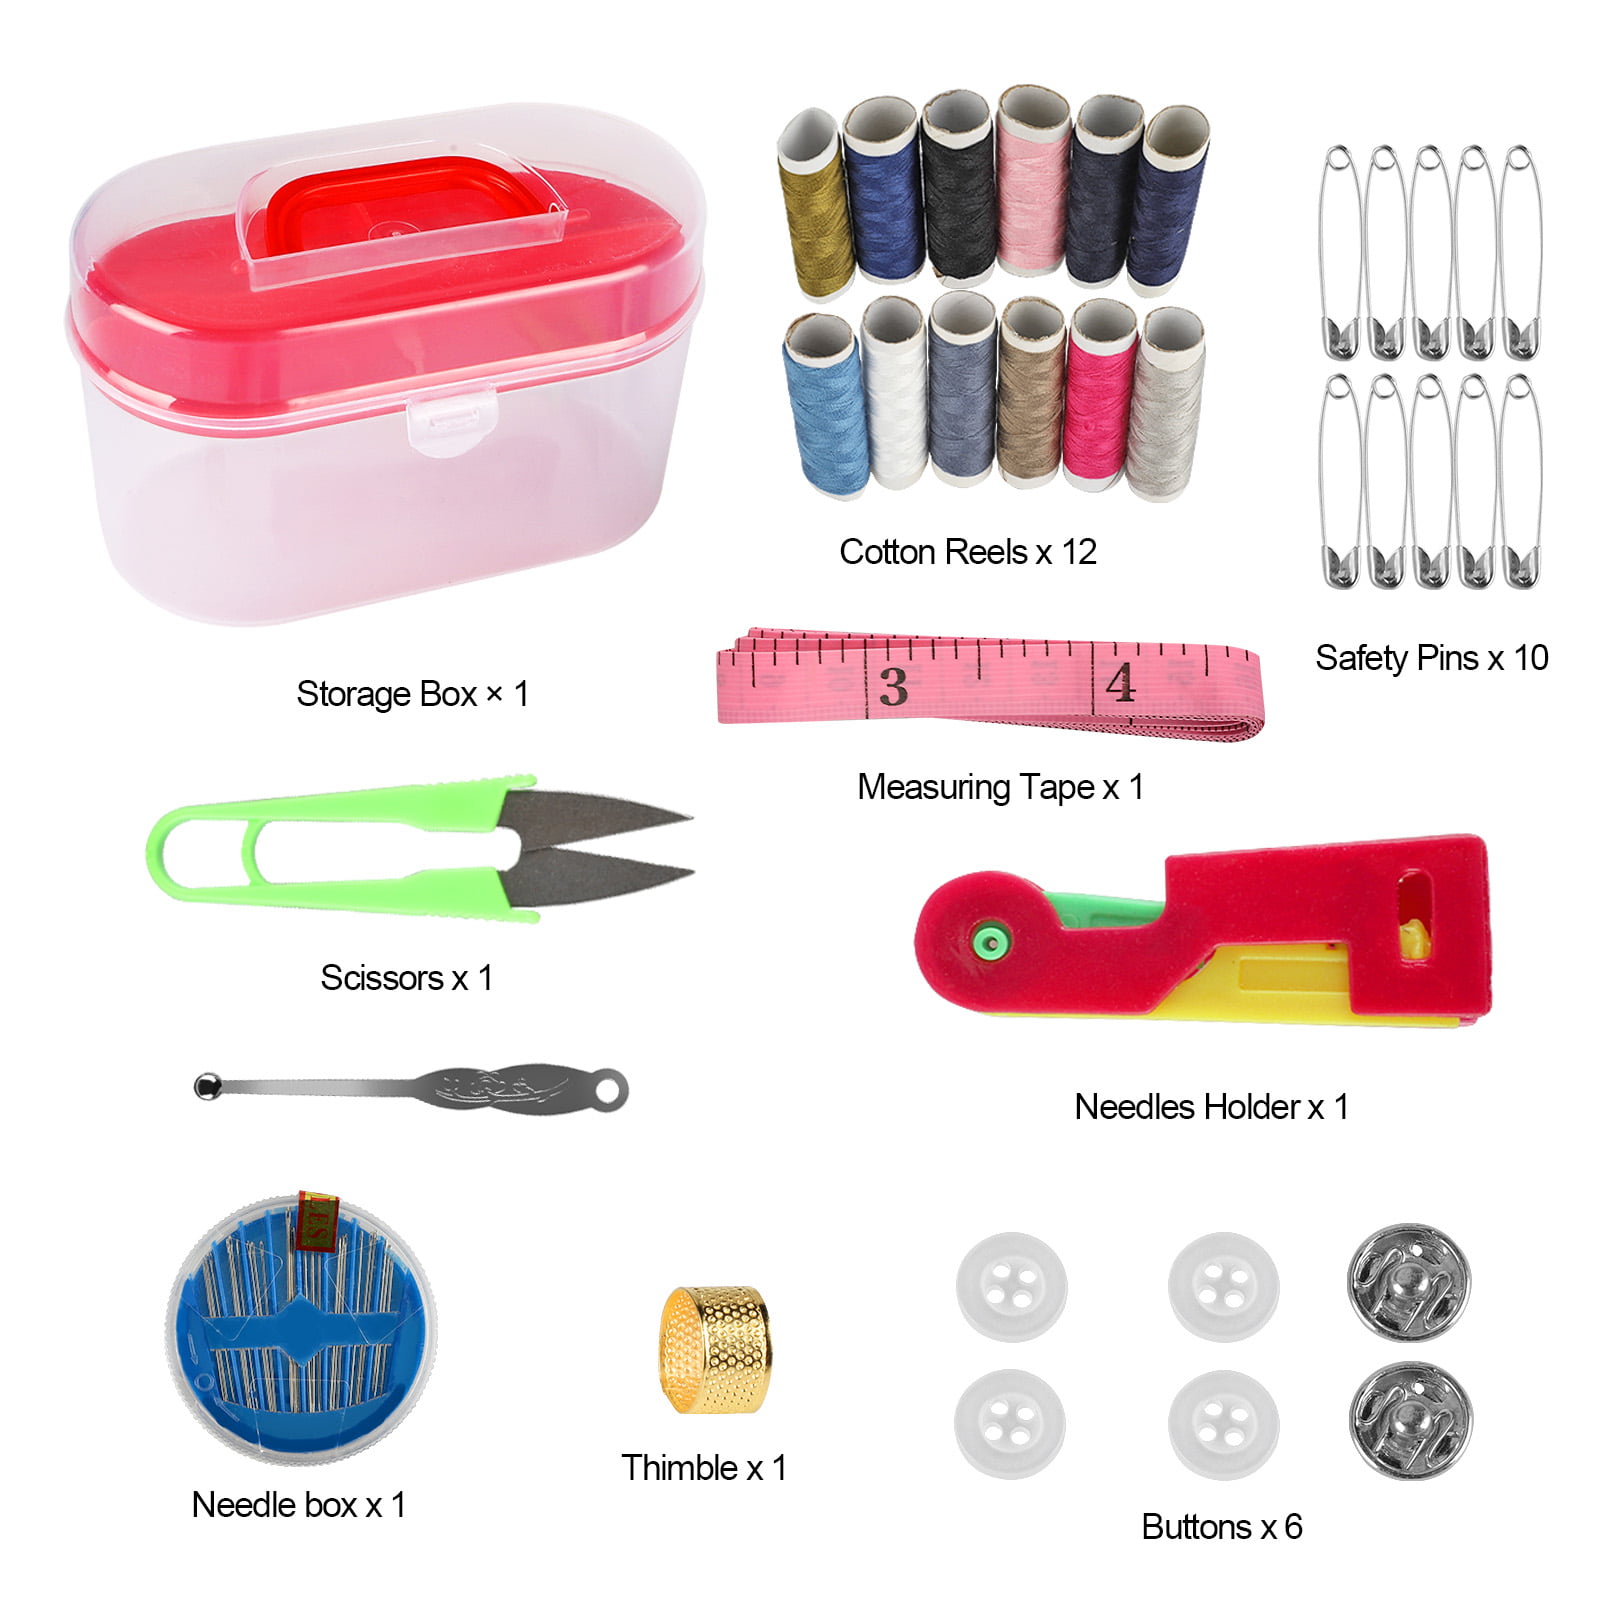 Sewing Kit, TSV 126pcs Set XL Sewing Supplies with Case Includes Scissors, Thimble, Thread, Needles, Tape Measure, Size: 0:没有相关性, Multicolor